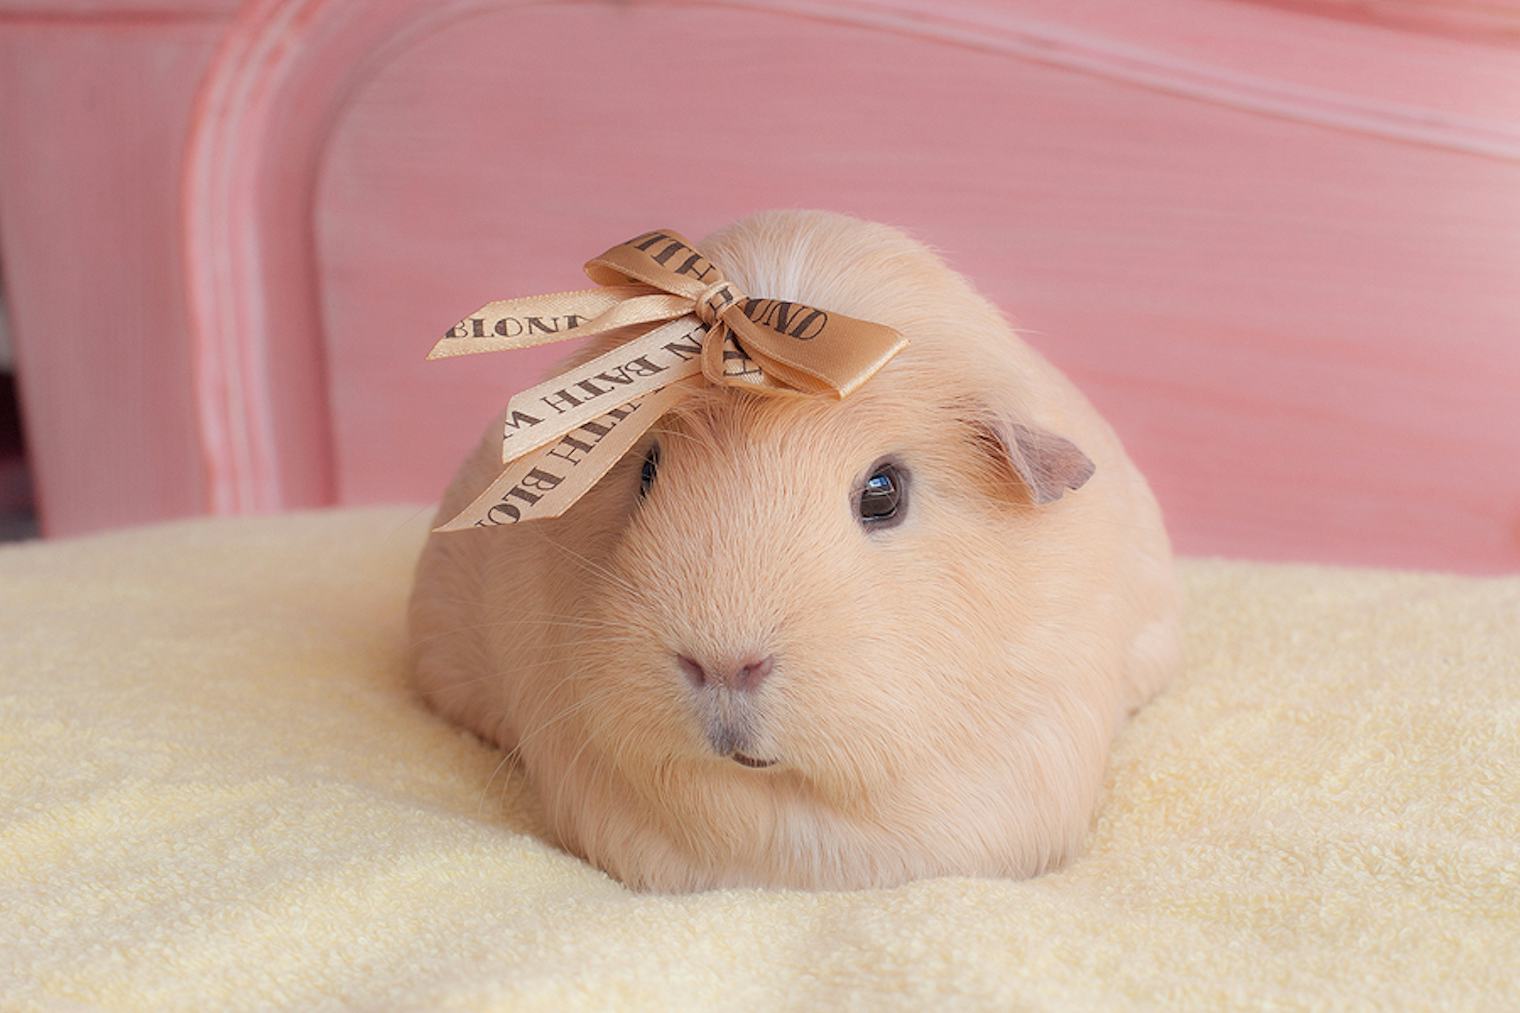 Meet Booboo, The Cutest Guinea Pig On the Internet (and His Adorable